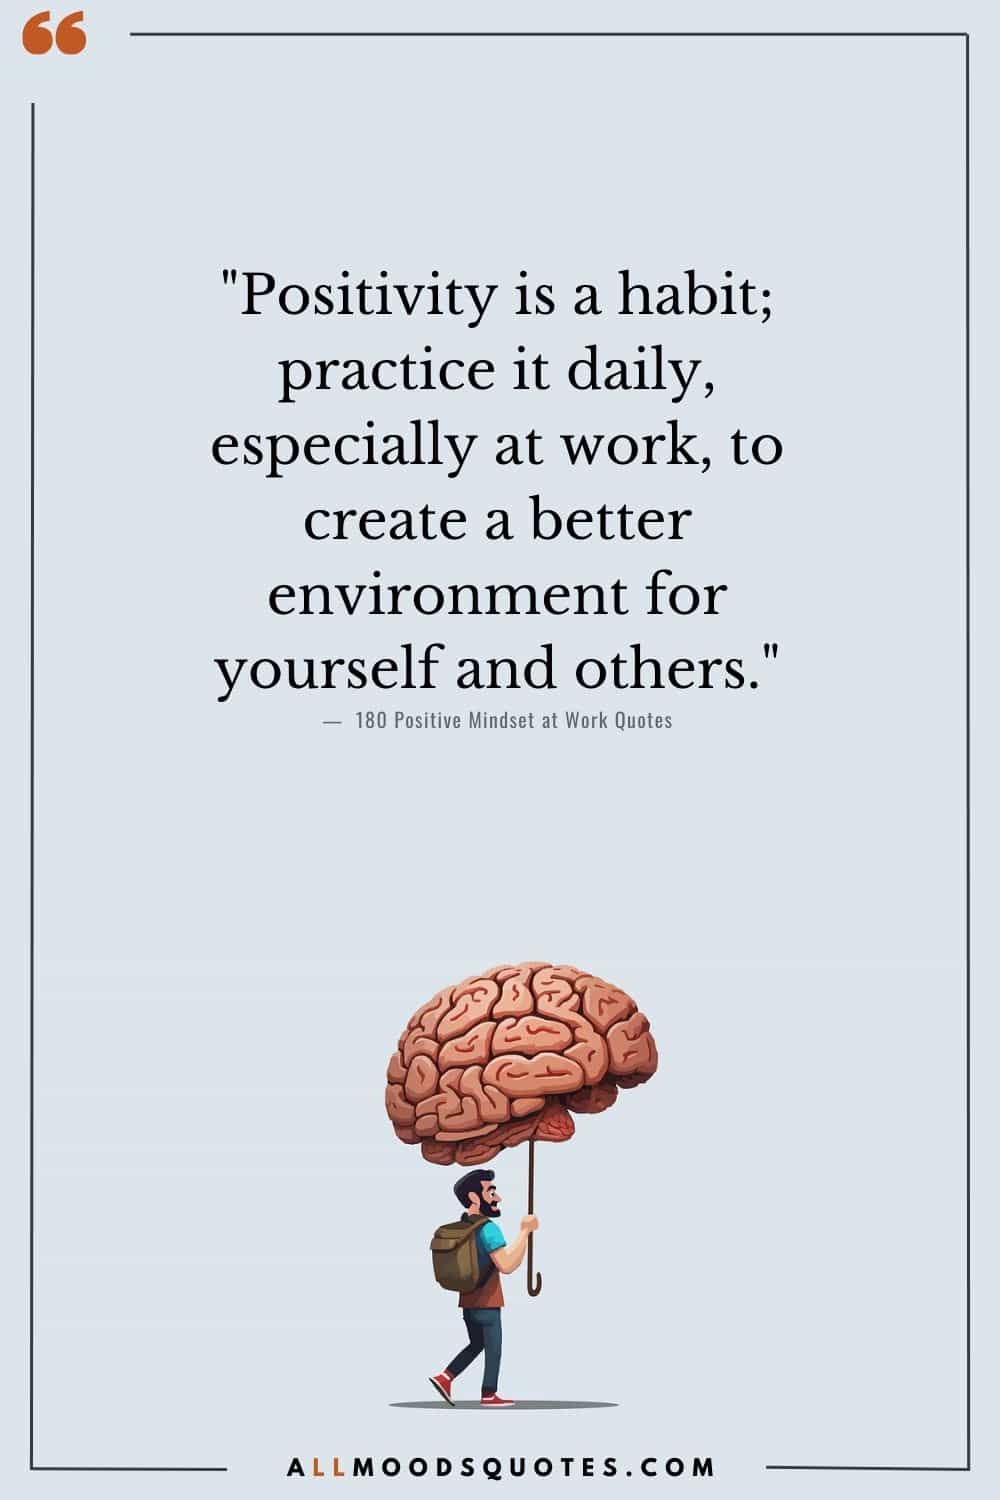 "Positivity is a habit; practice it daily, especially at work, to create a better environment for yourself and others." - Unknown